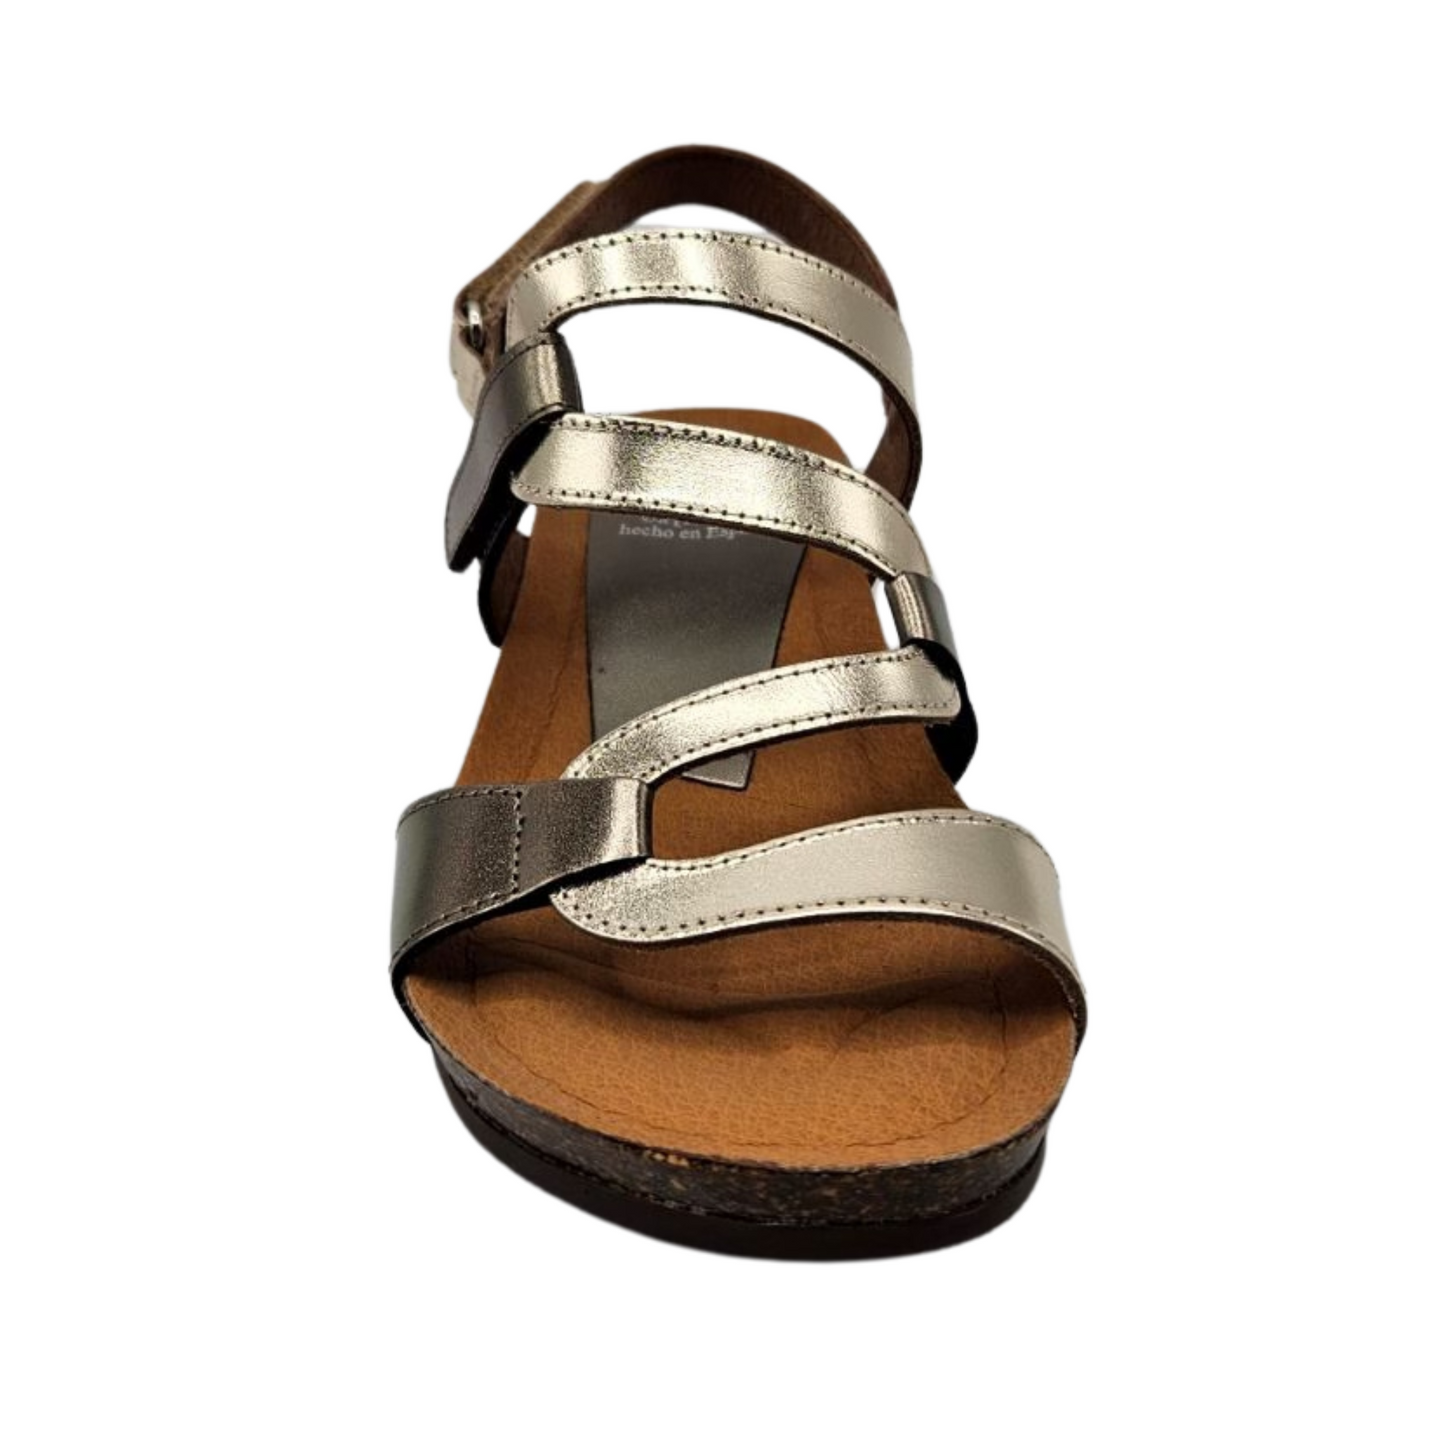 Front facing  view of metallic leather sandal with wavy strap design, rounded toe and slight wedge heel.